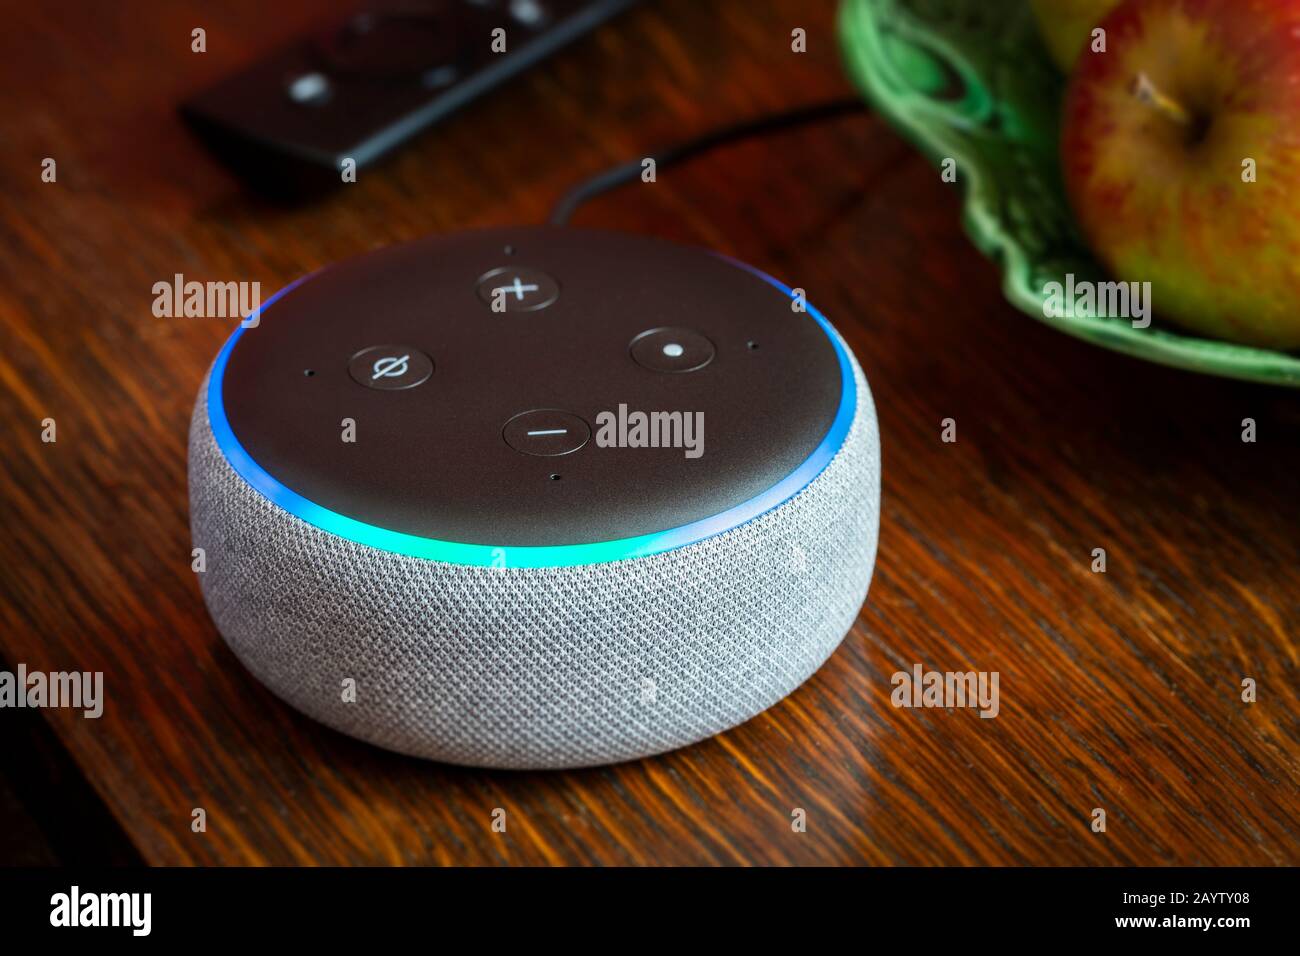 BATH, UK - FEBRUARY 17, 2020 : Close up of a 3rd generation Amazon Echo Dot glowing blue on a table in a domestic environment Stock Photo